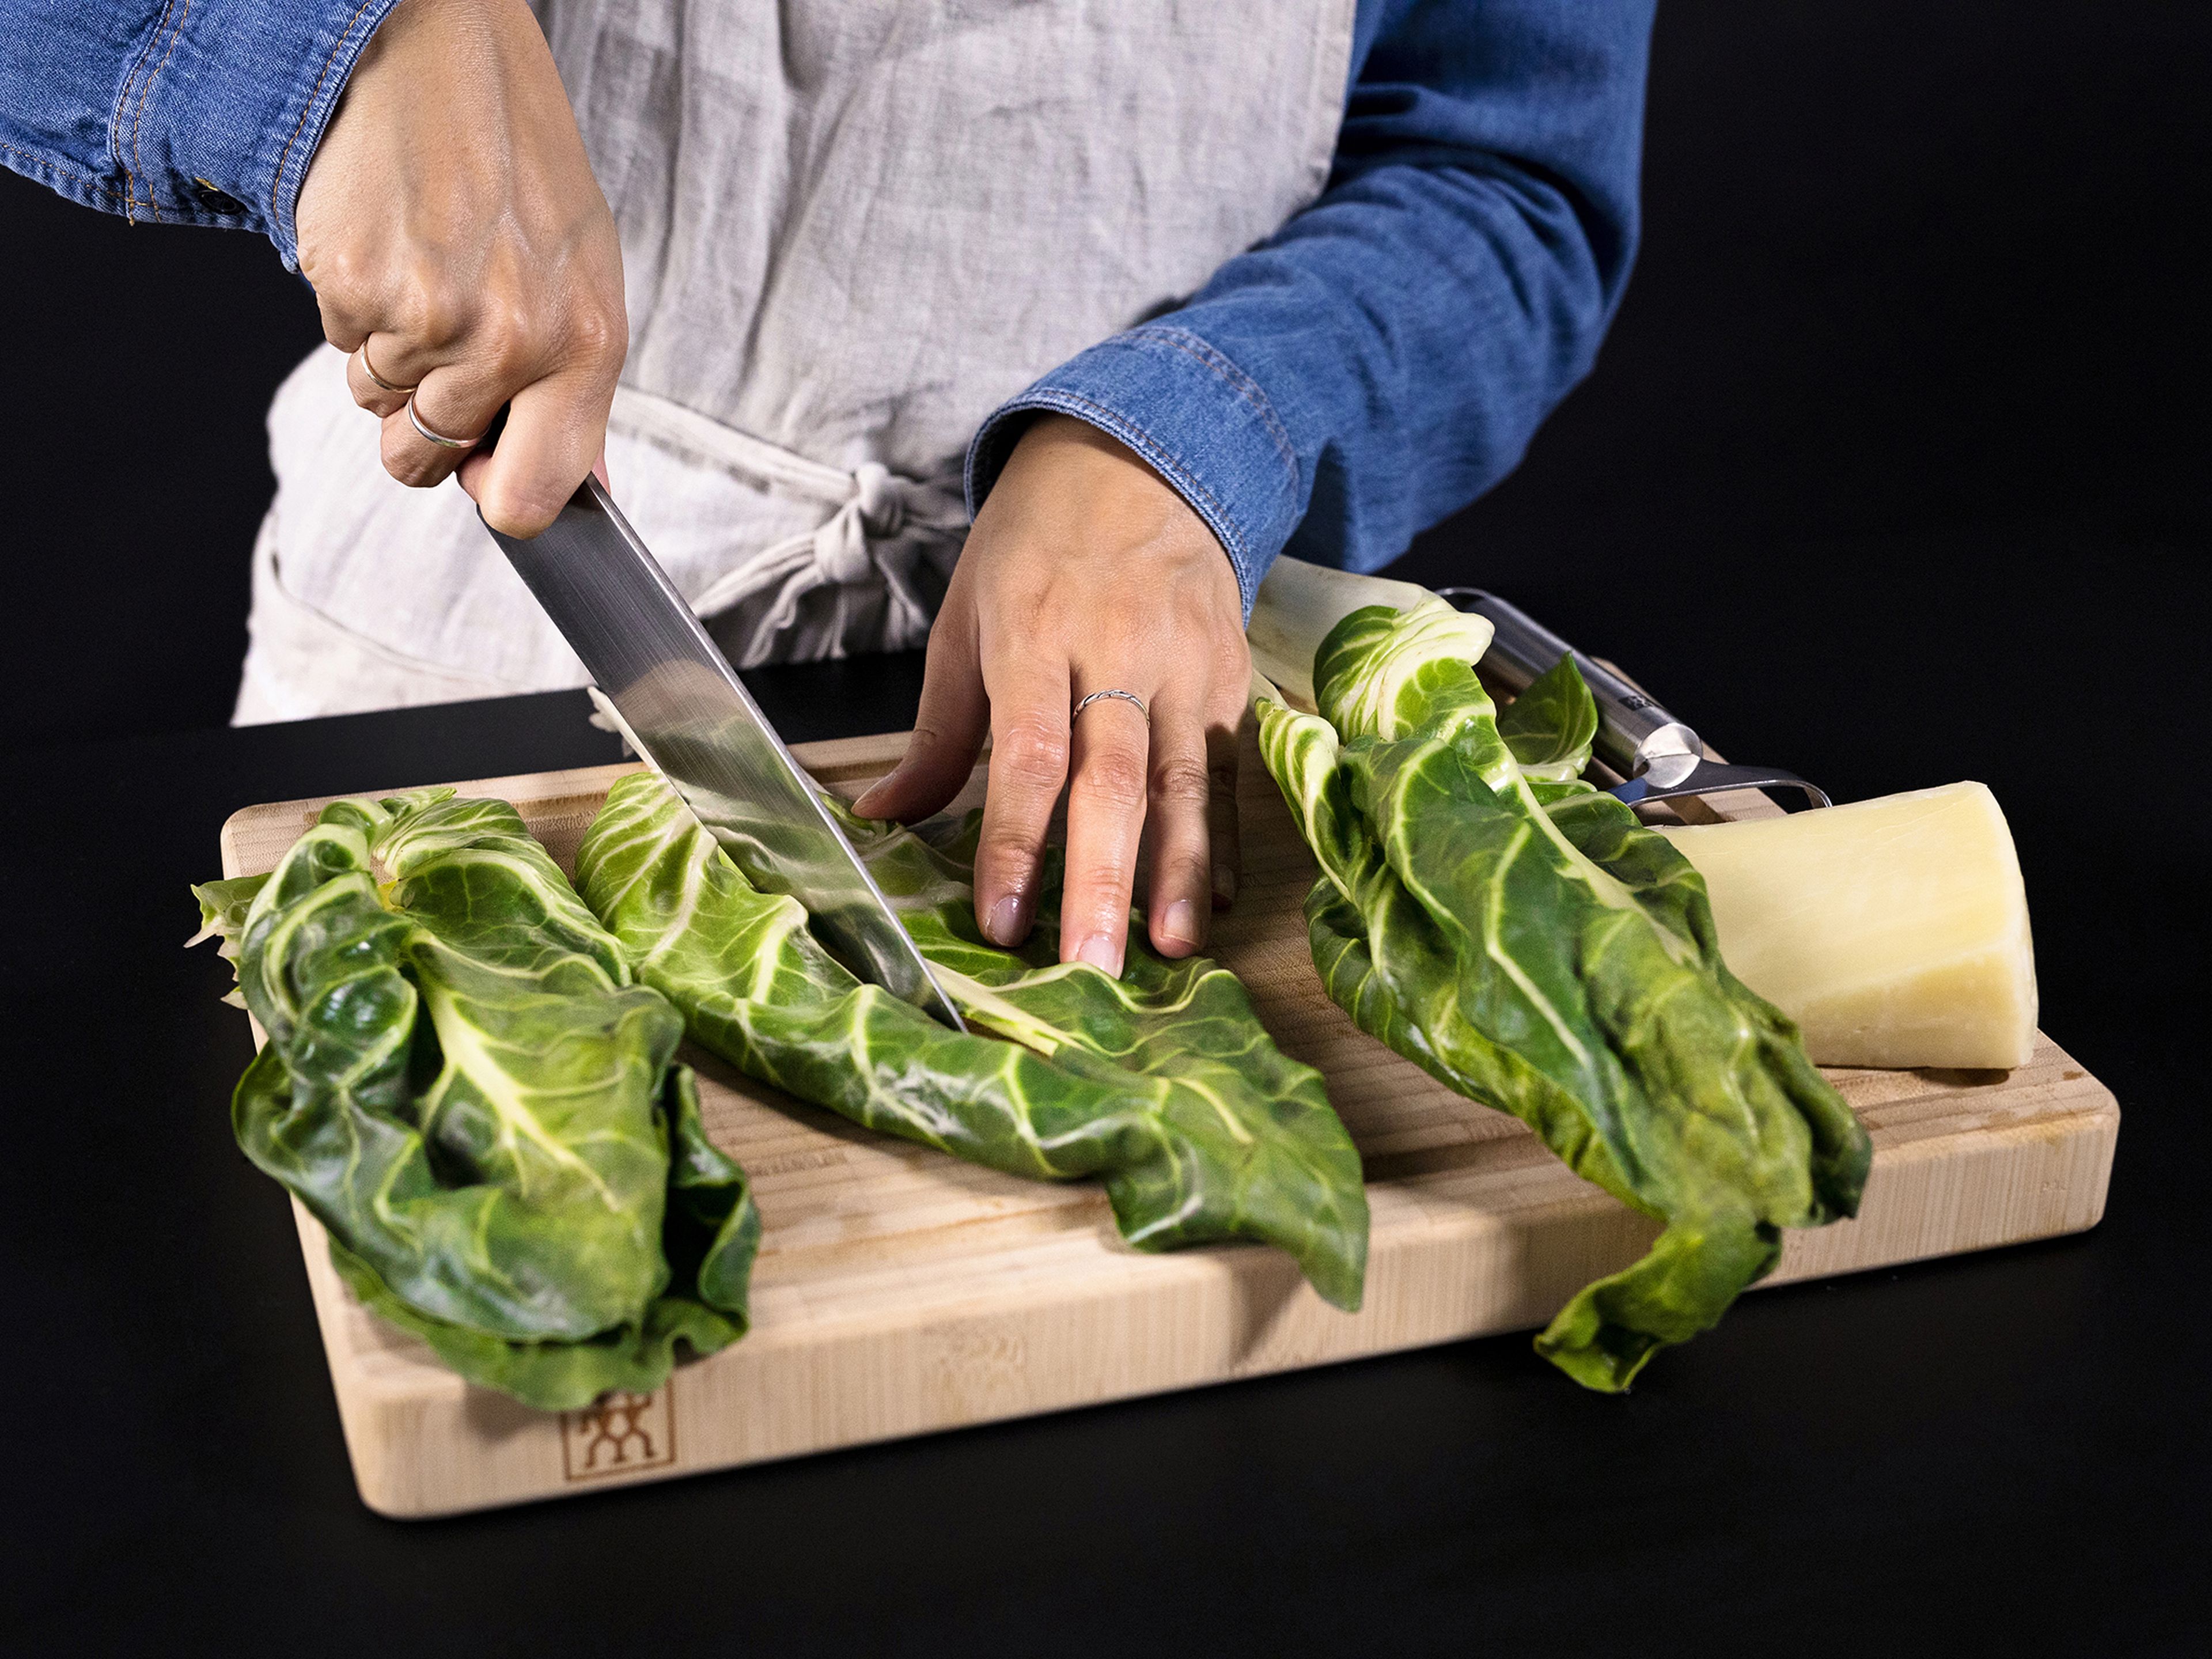 Remove the stems from the swiss chard and cut the leaves into large pieces. Use a vegetable peeler to shave pecorino into thin slices.